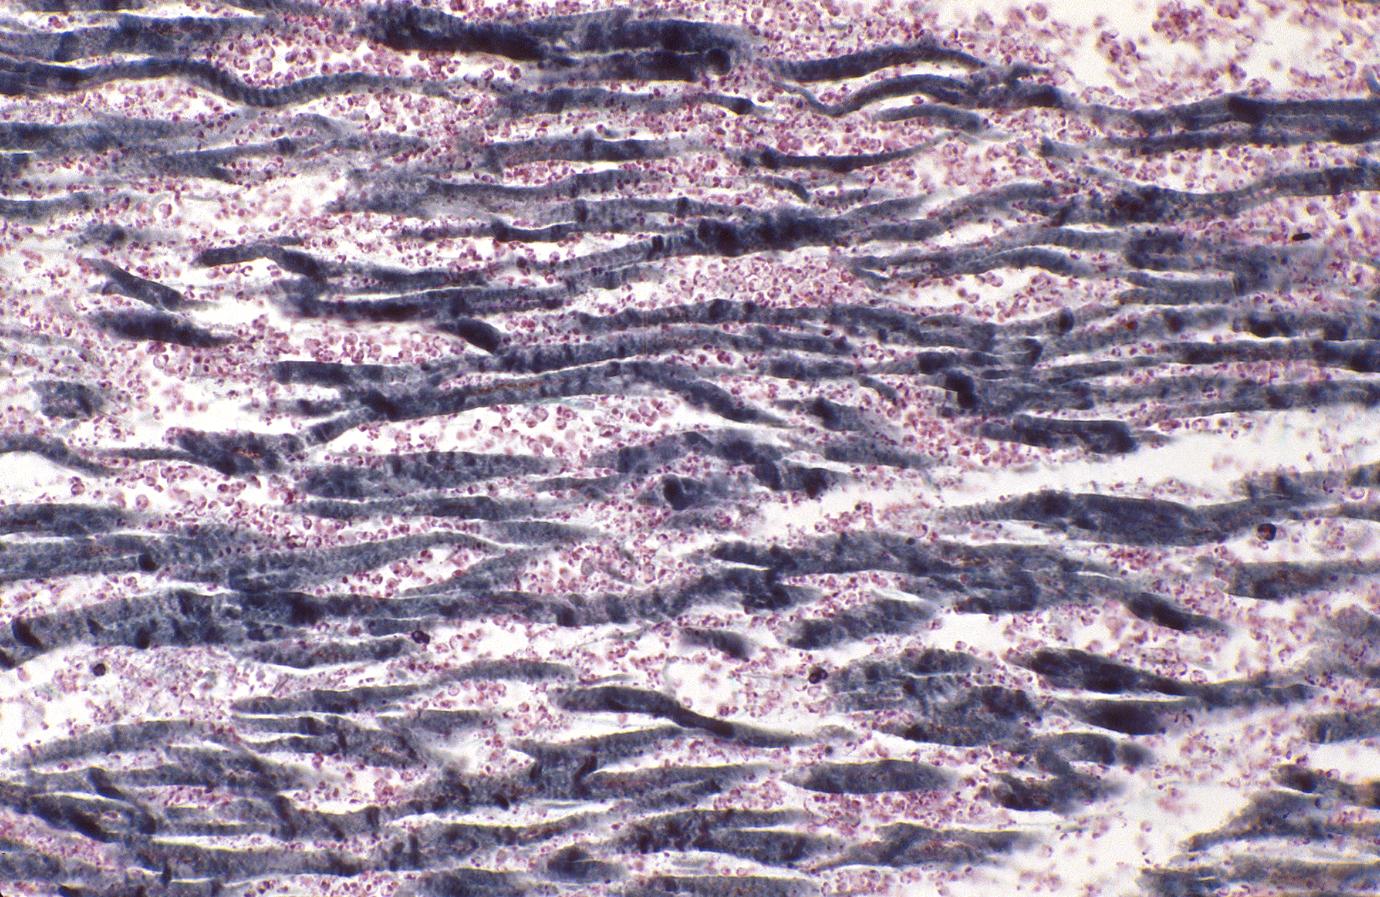 Acute myocardial infarction, ischemic fibers demonstrated by aldehyde fuchsin stain